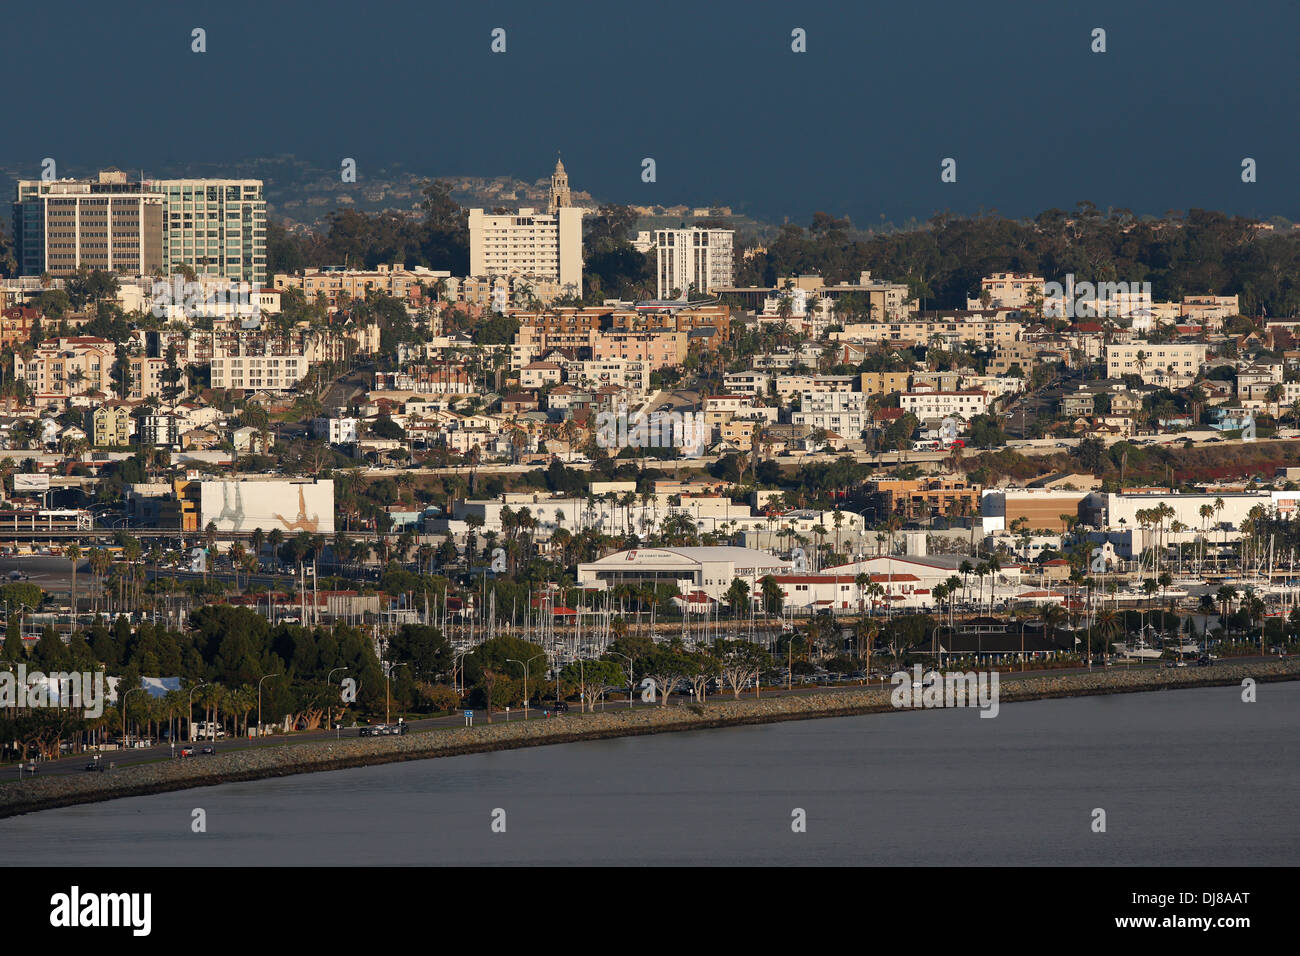 A view of Little Italy, Hillcrest, and Balboa Park in San Diego, California. San Diego Bay and Harbor Island are in the foreground. Stock Photo